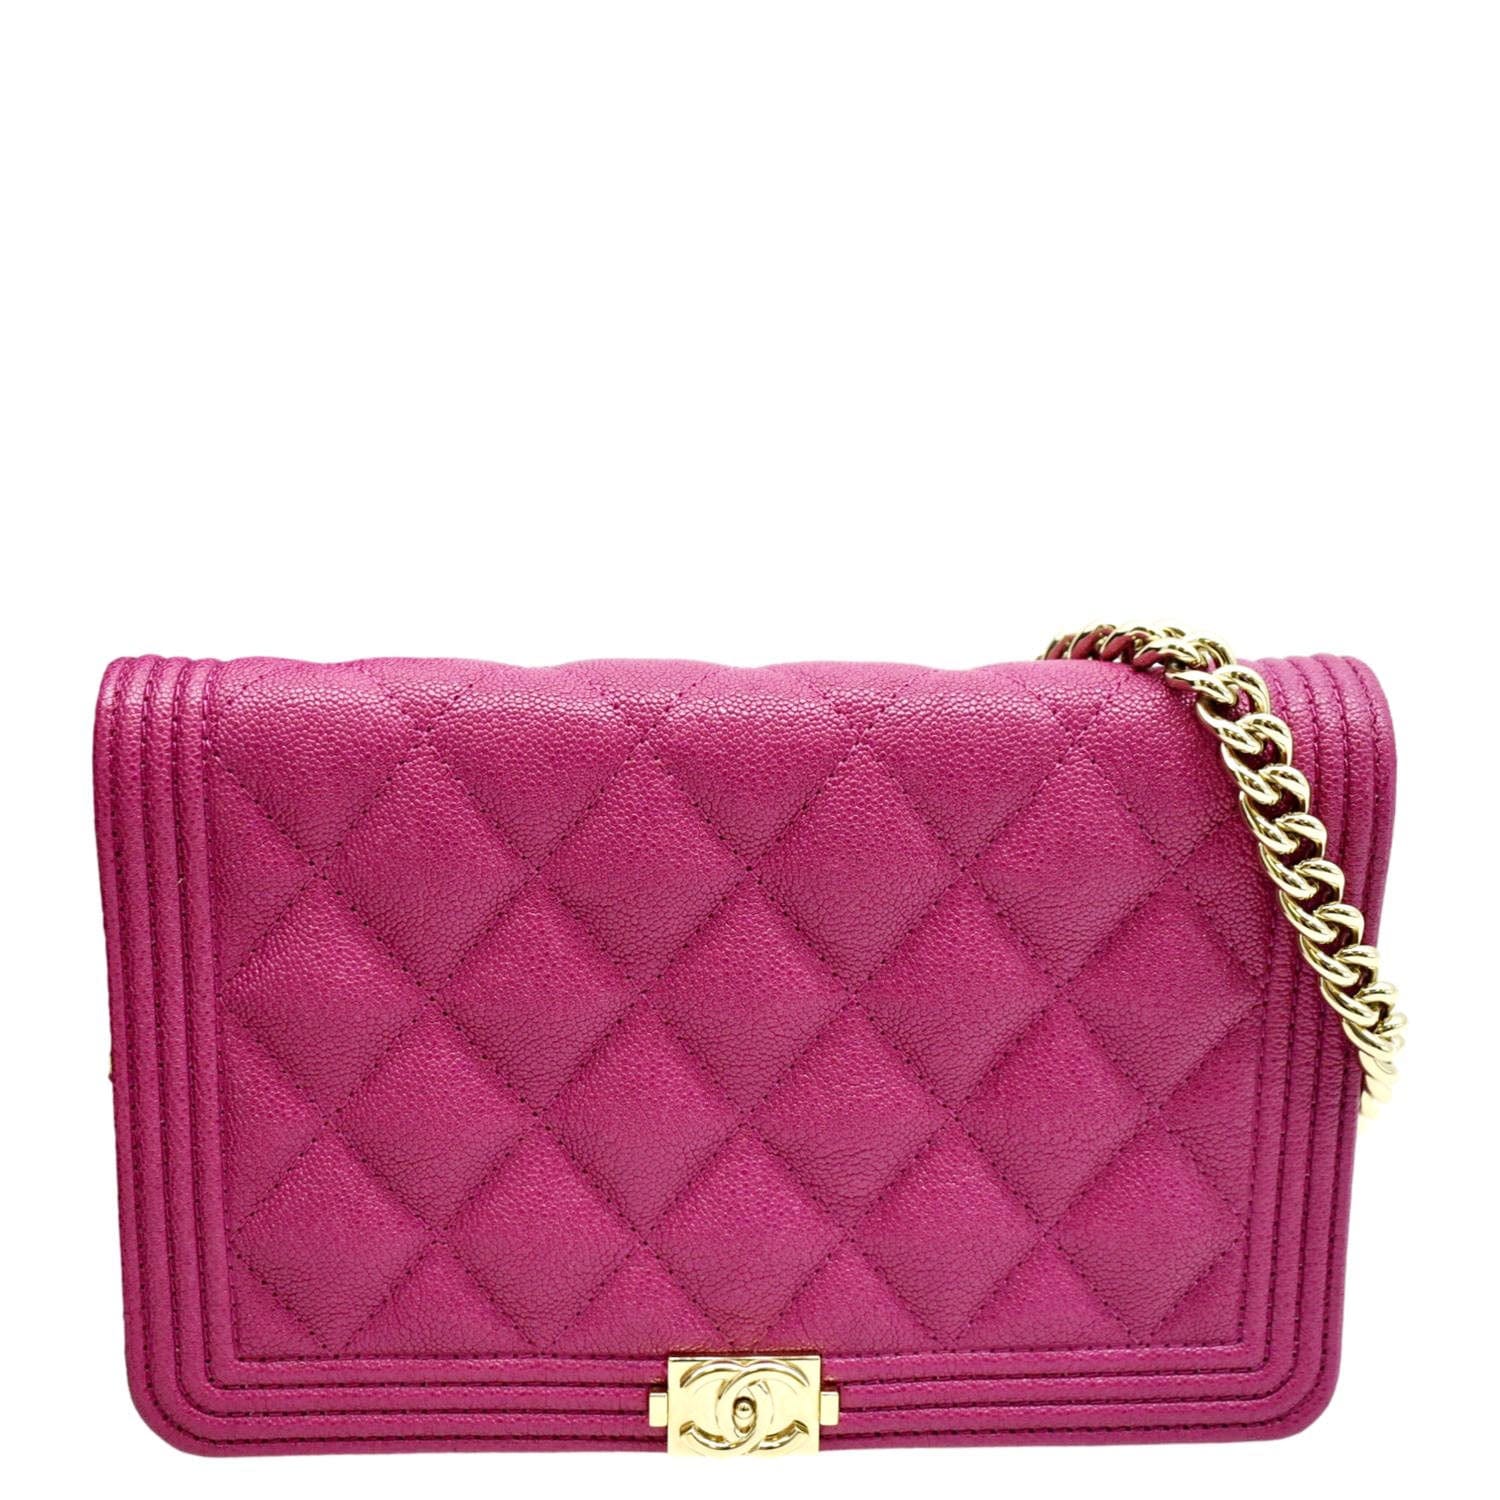 CHANEL Boy Woc Quilted Caviar Leather Wallet on Chain Crossbody Bag Pi